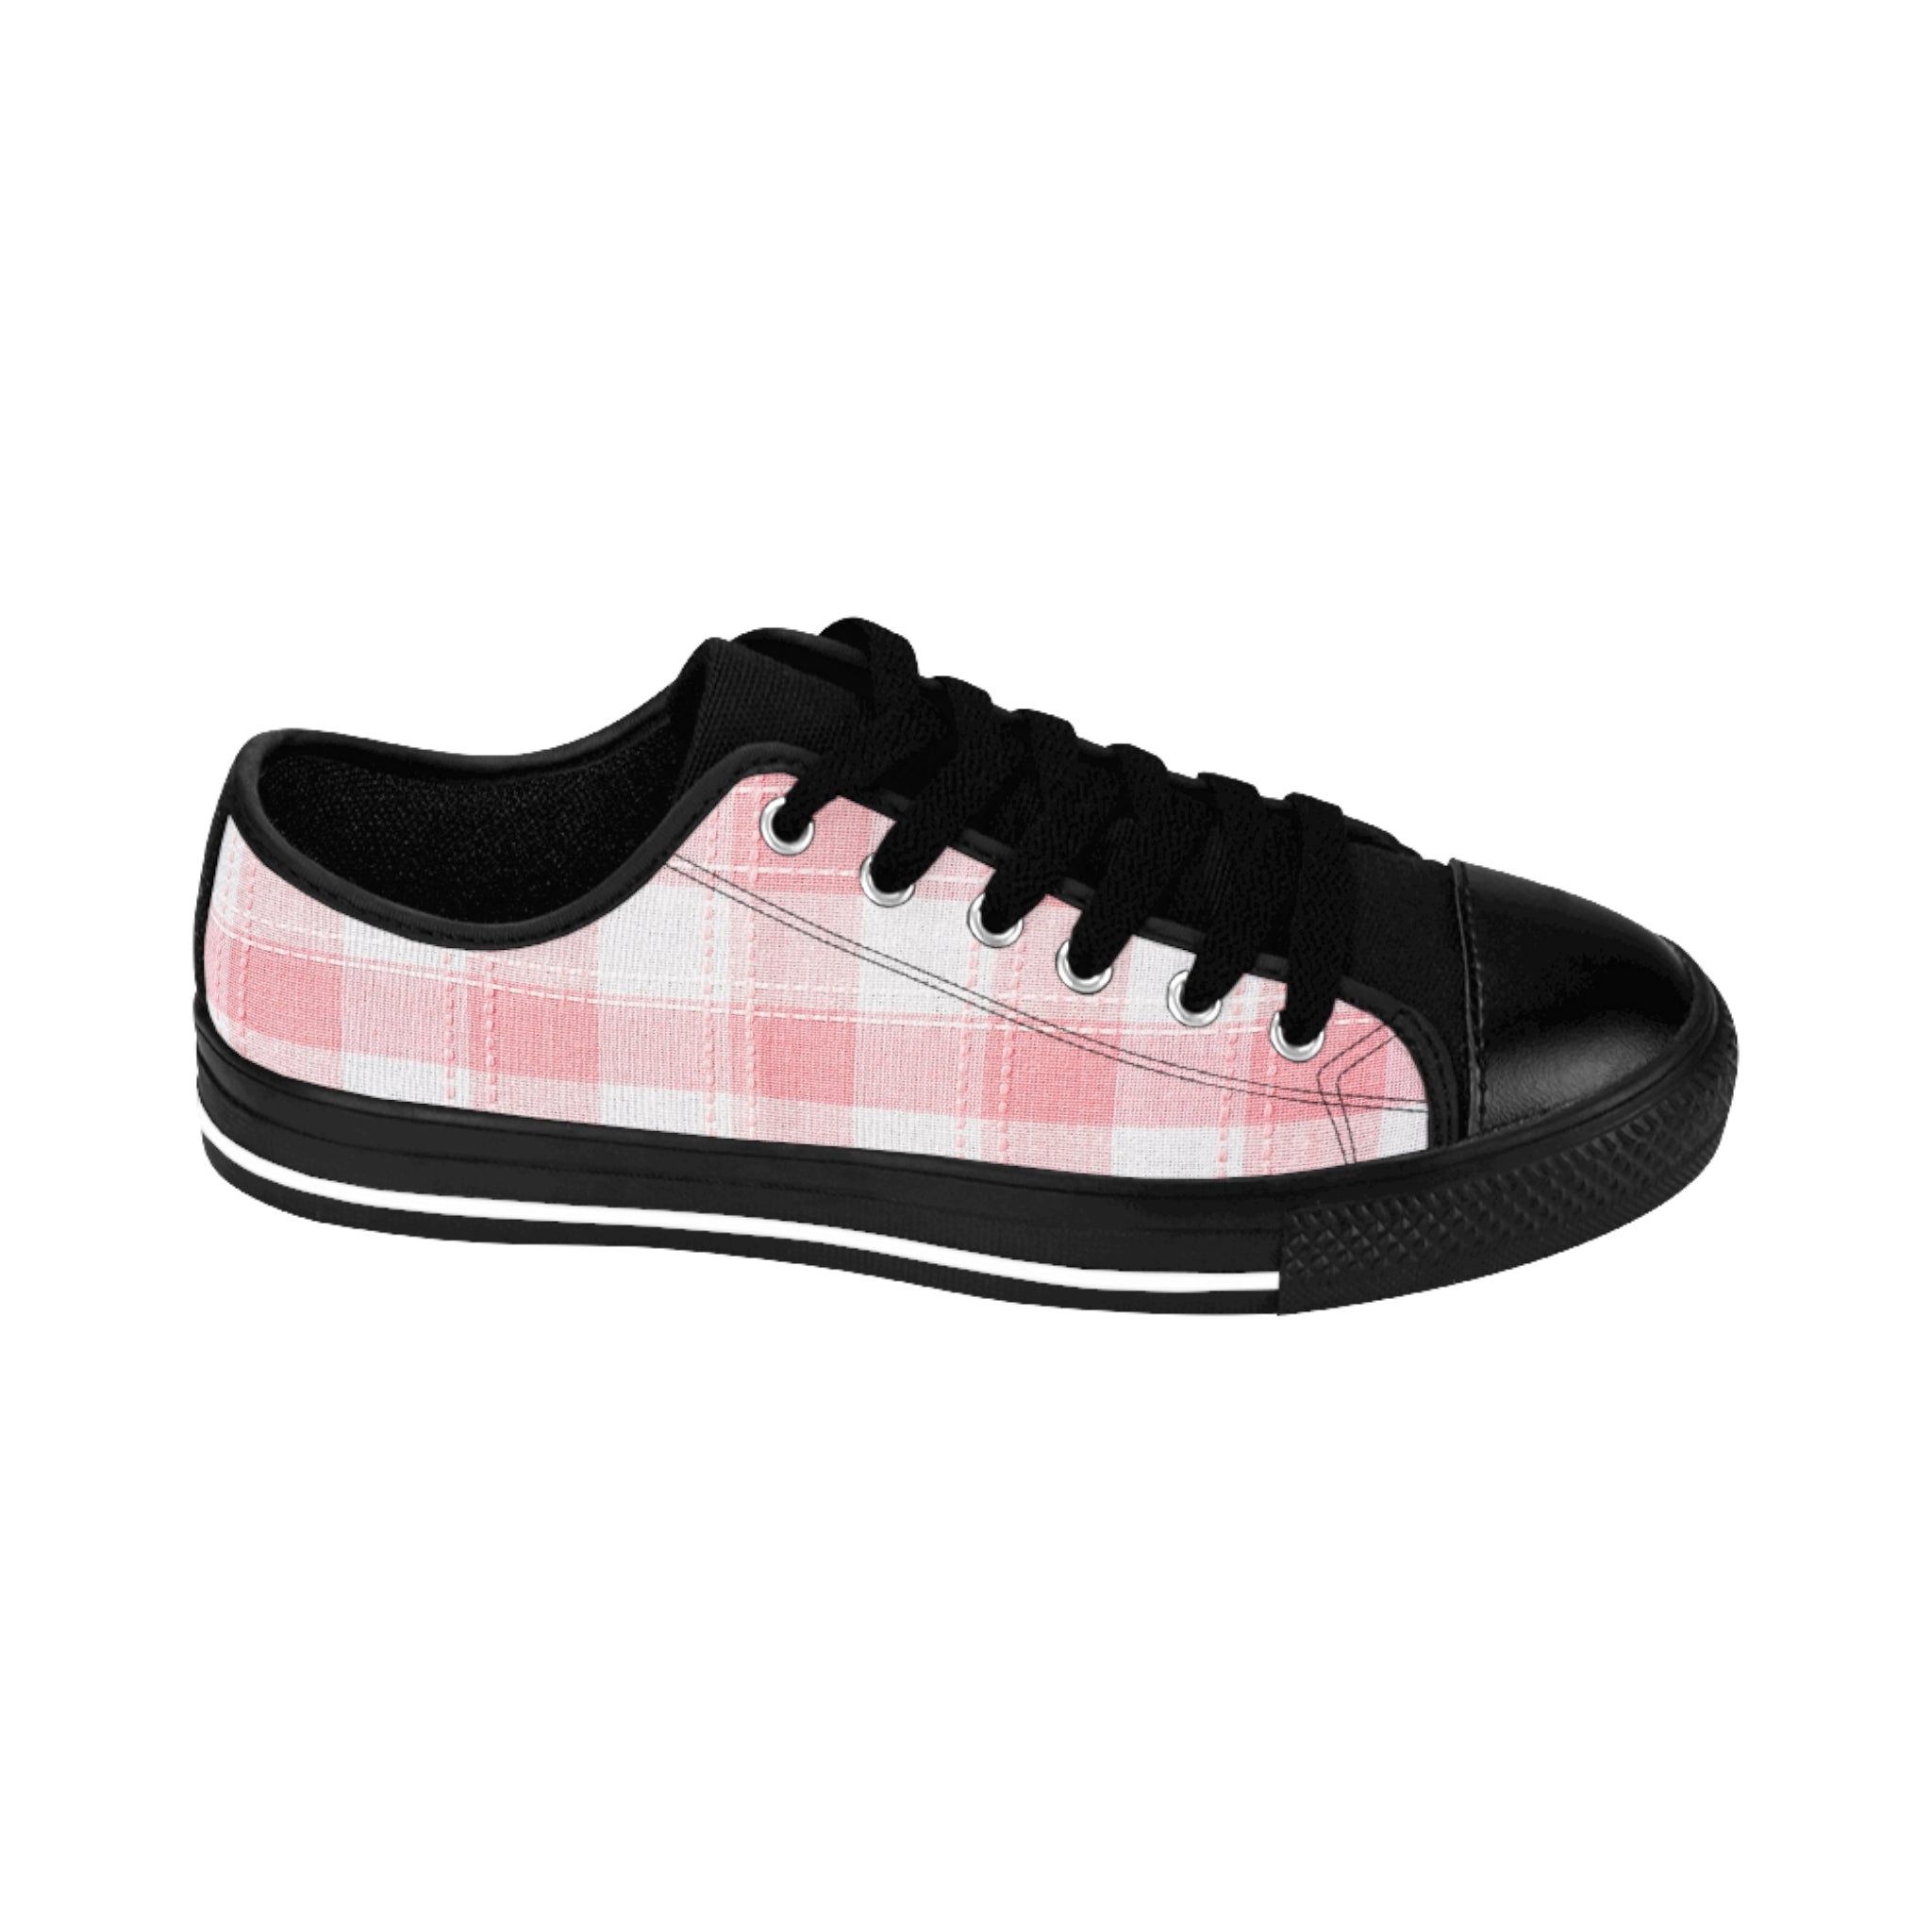 Designer Collection in Plaid (Pink) Women's Low Top Canvas Shoes Shoes US-12-Black-sole The Middle Aged Groove